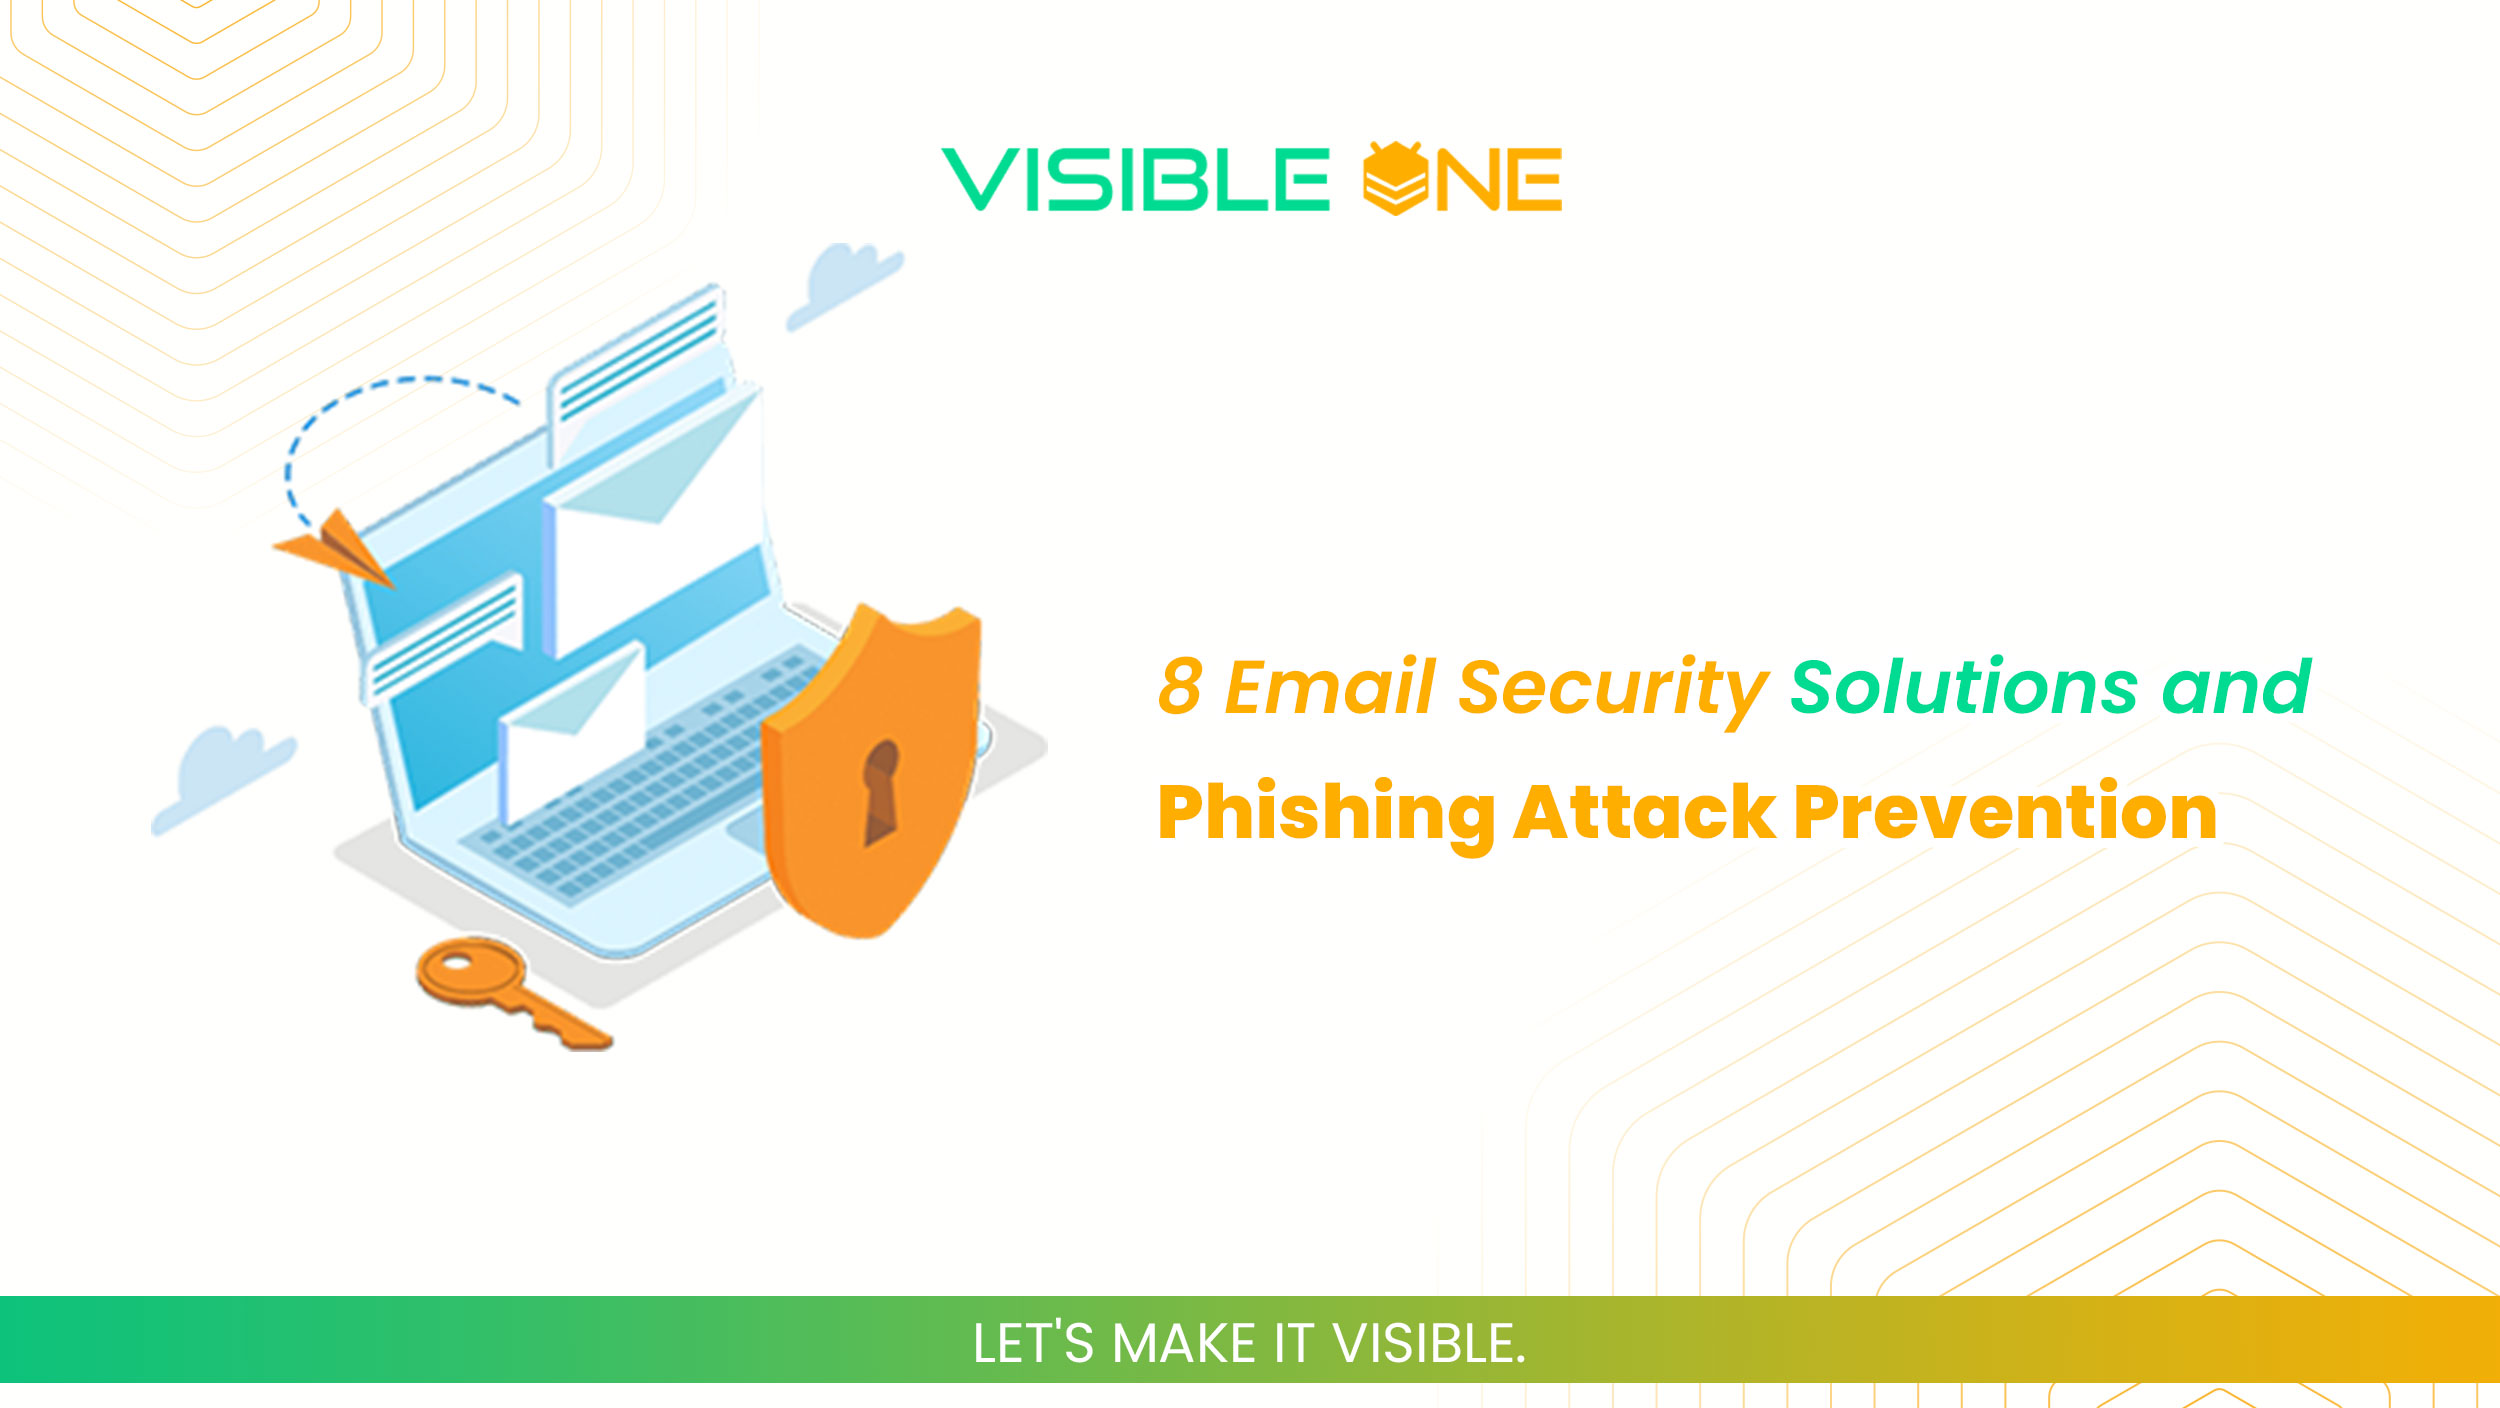 8 Email Security Solutions and Phishing Attack Prevention